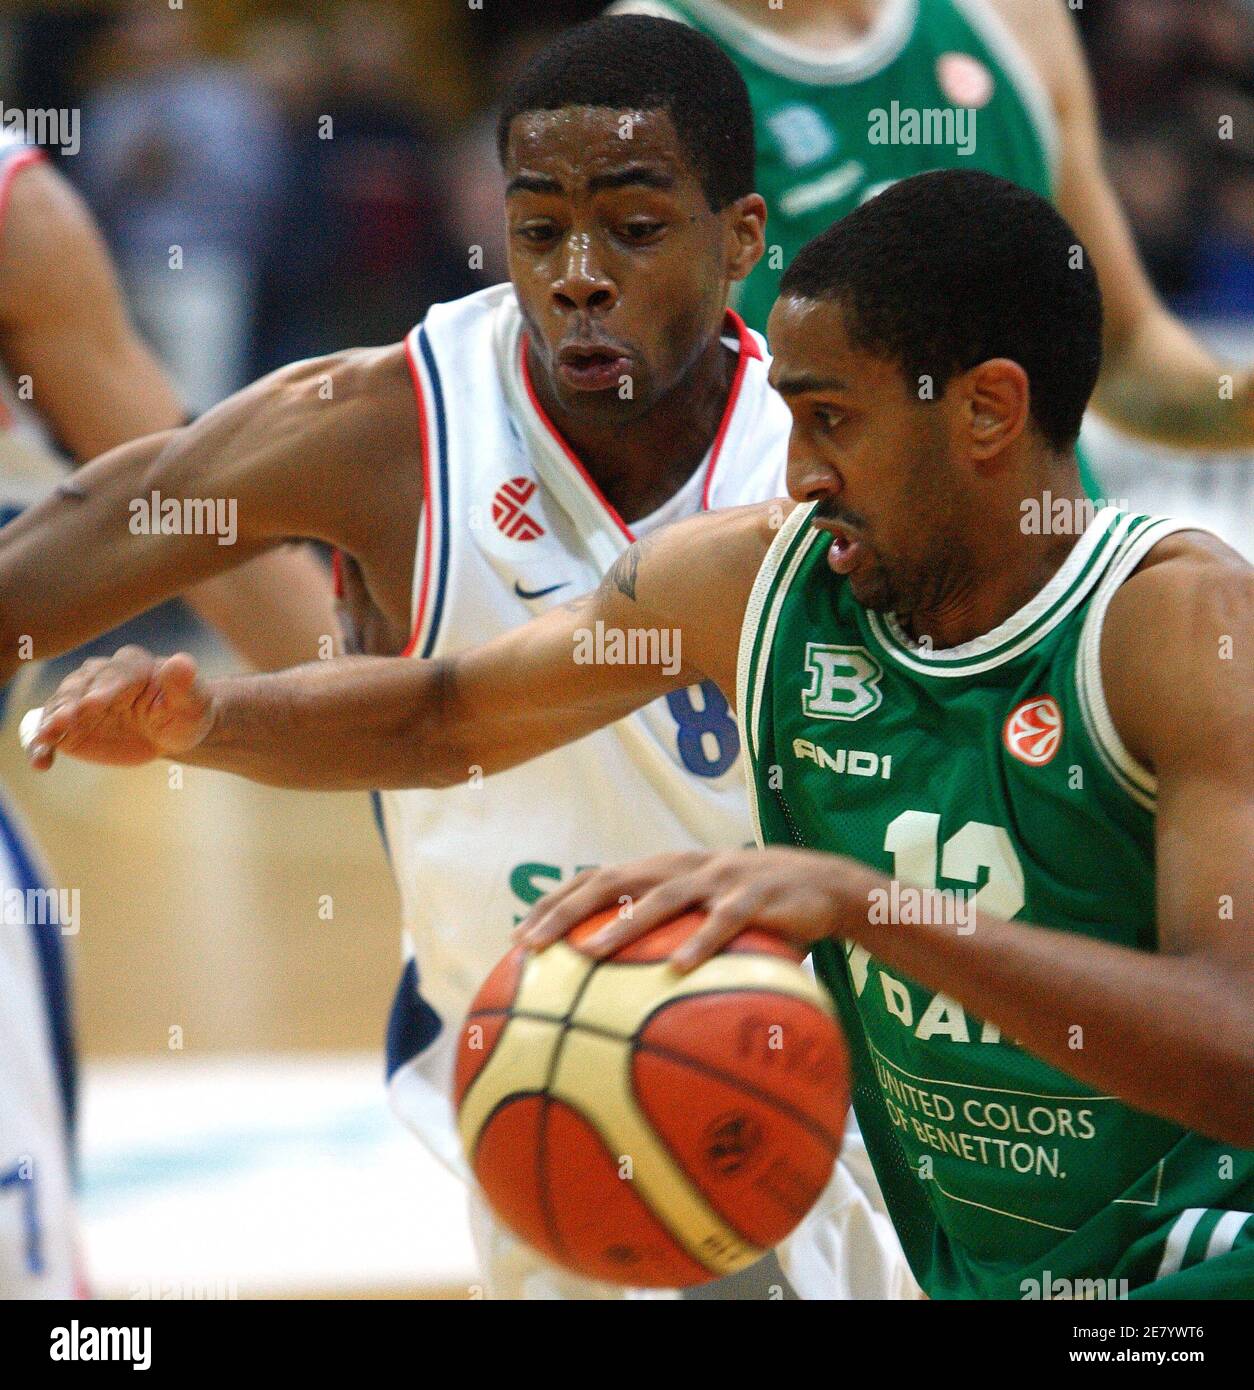 Andrew Nicholas (R) of Benetton Treviso passes Levour Warren (L) of Cibona  Zagreb during their 3rd round top 16 Euroleague basketball match in Zagreb  March 8, 2006. REUTERS/Nikola Solic Stock Photo - Alamy